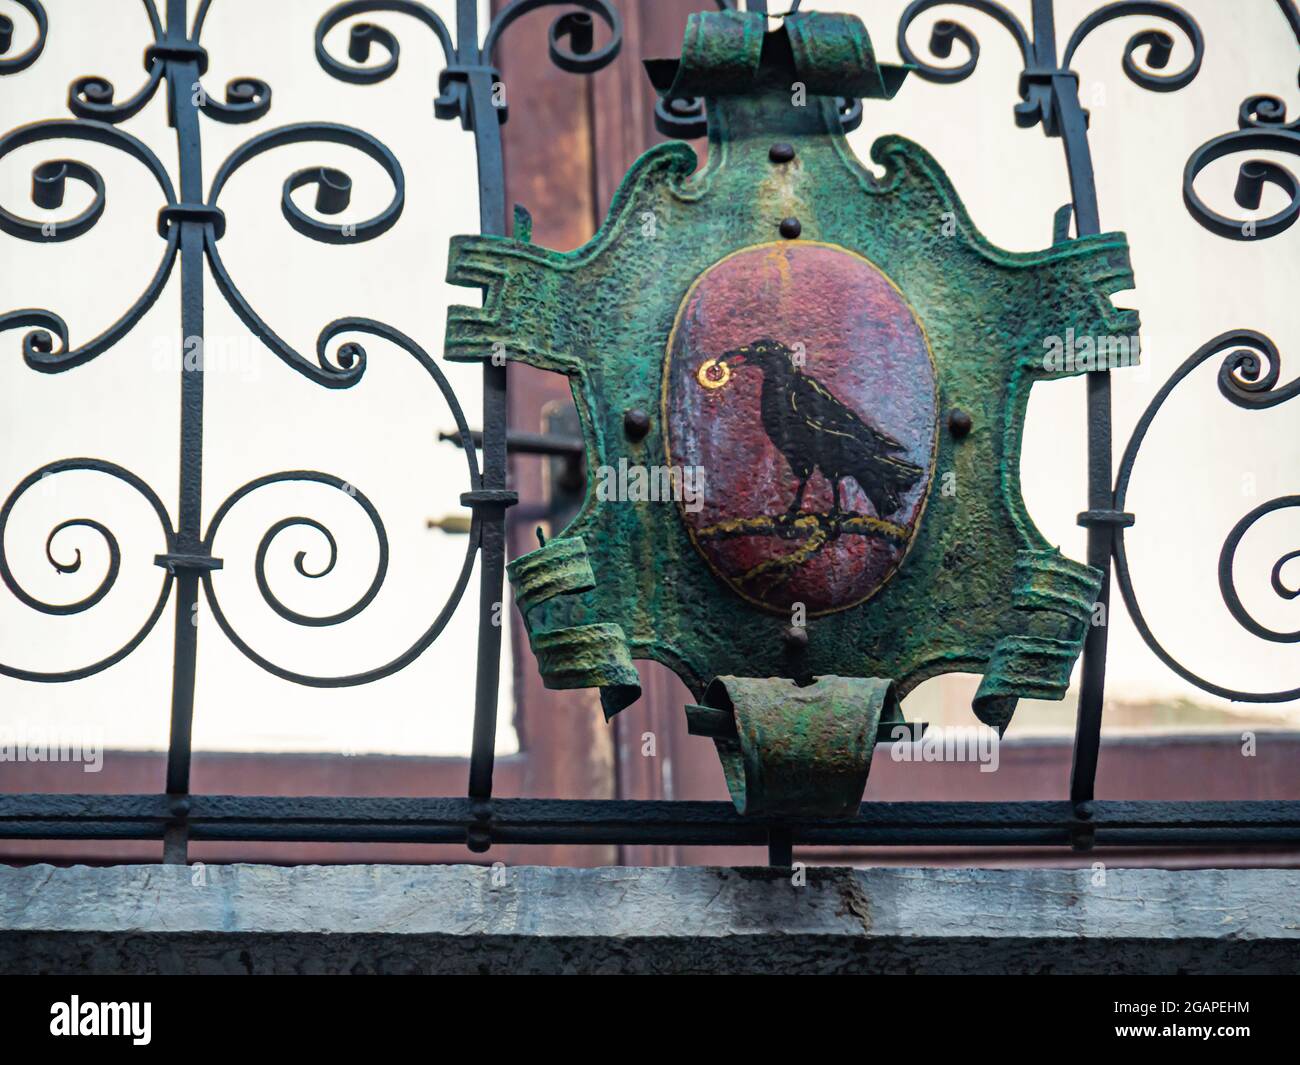 A rusty old gate with a heraldic shield displaying a raven holding a golden ring on a red background Stock Photo